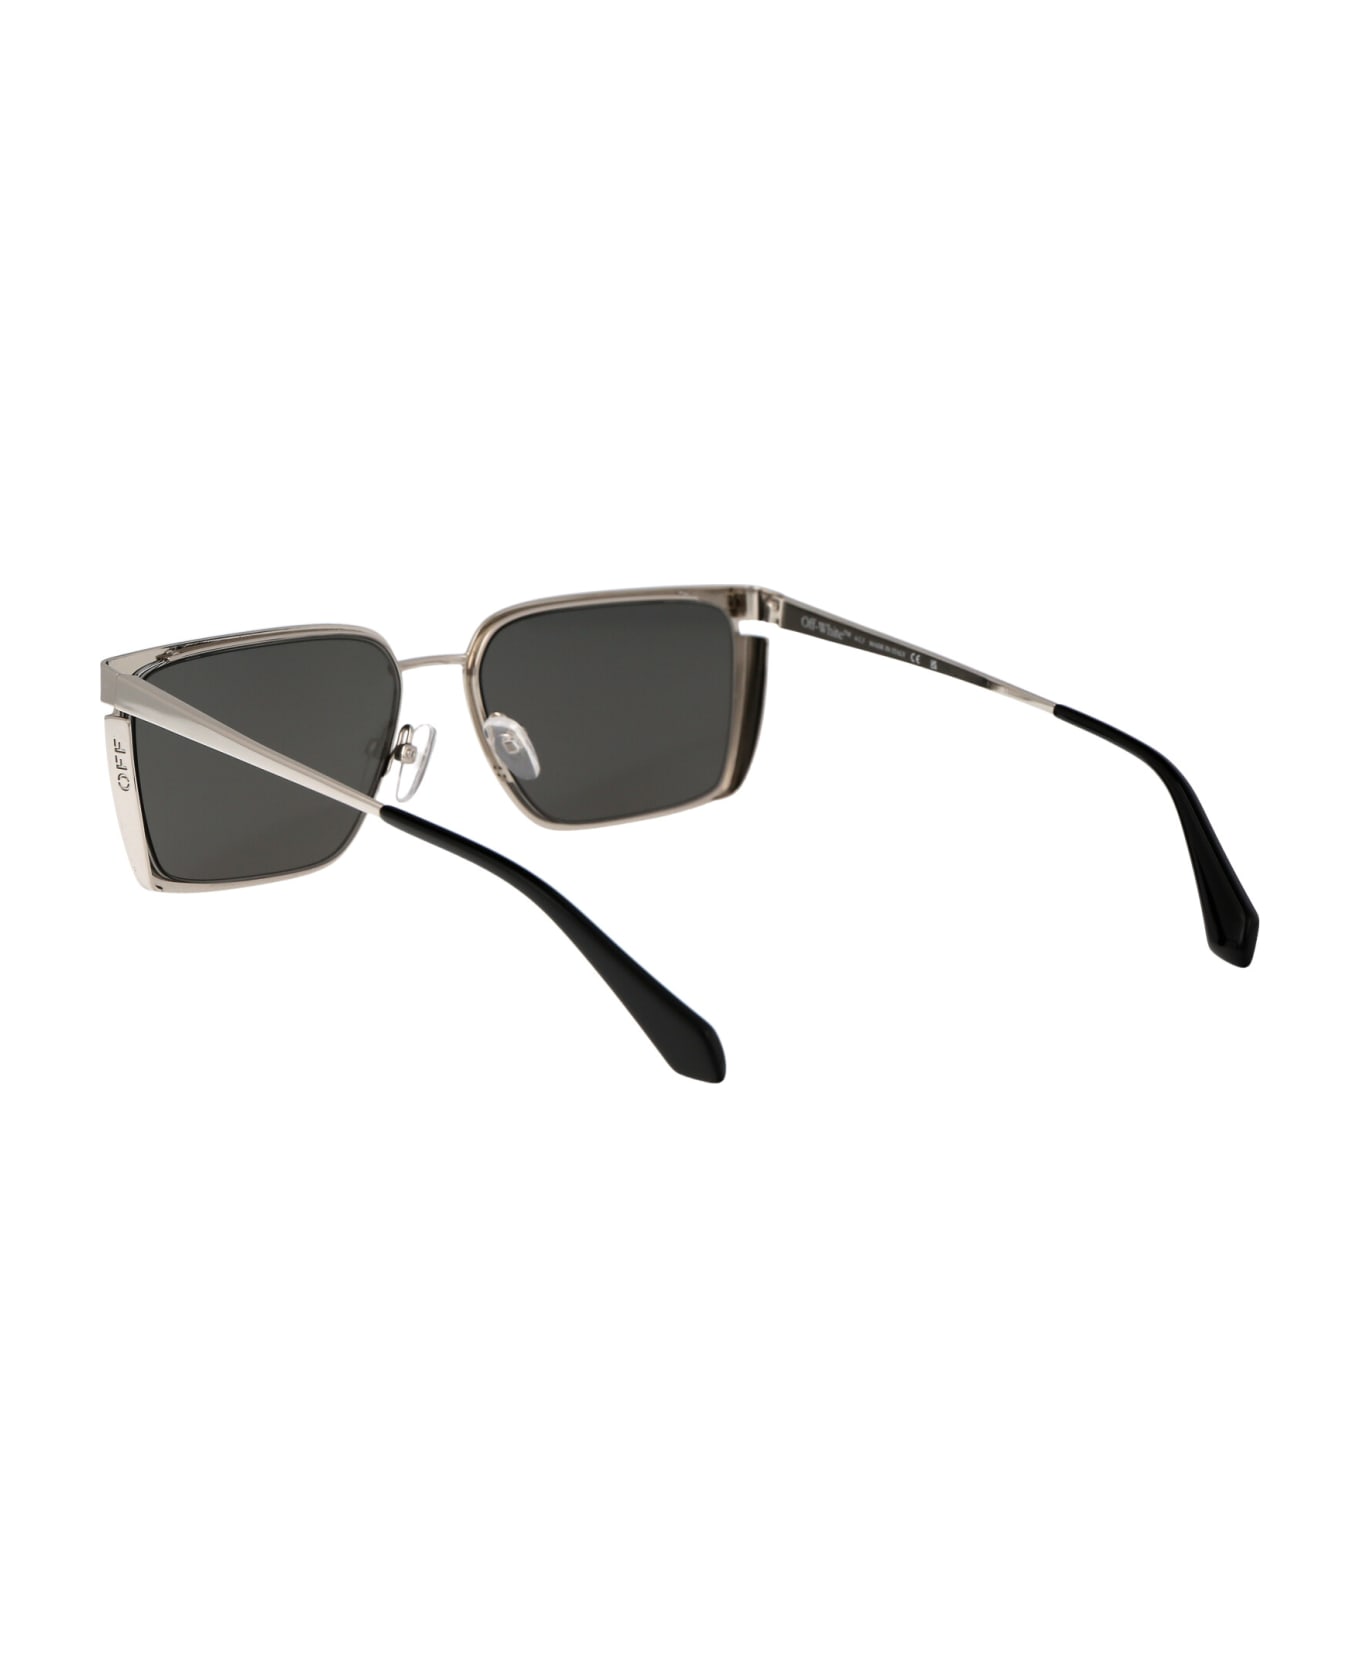 Off-White Yoder Sunglasses - 7272 SILVER SILVER